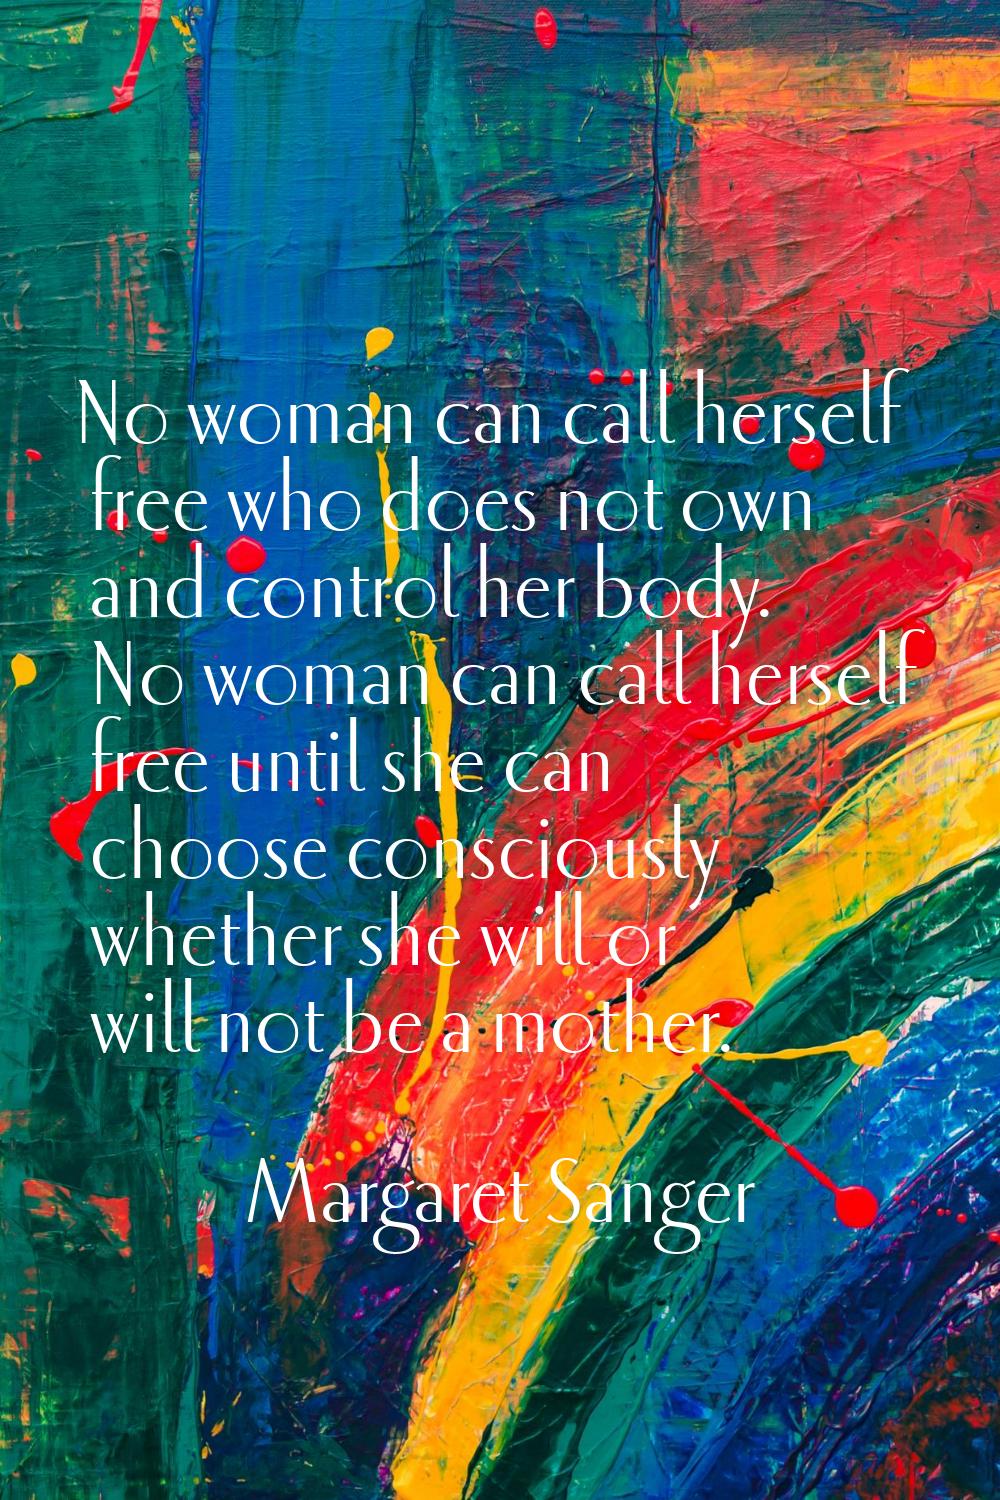 No woman can call herself free who does not own and control her body. No woman can call herself fre